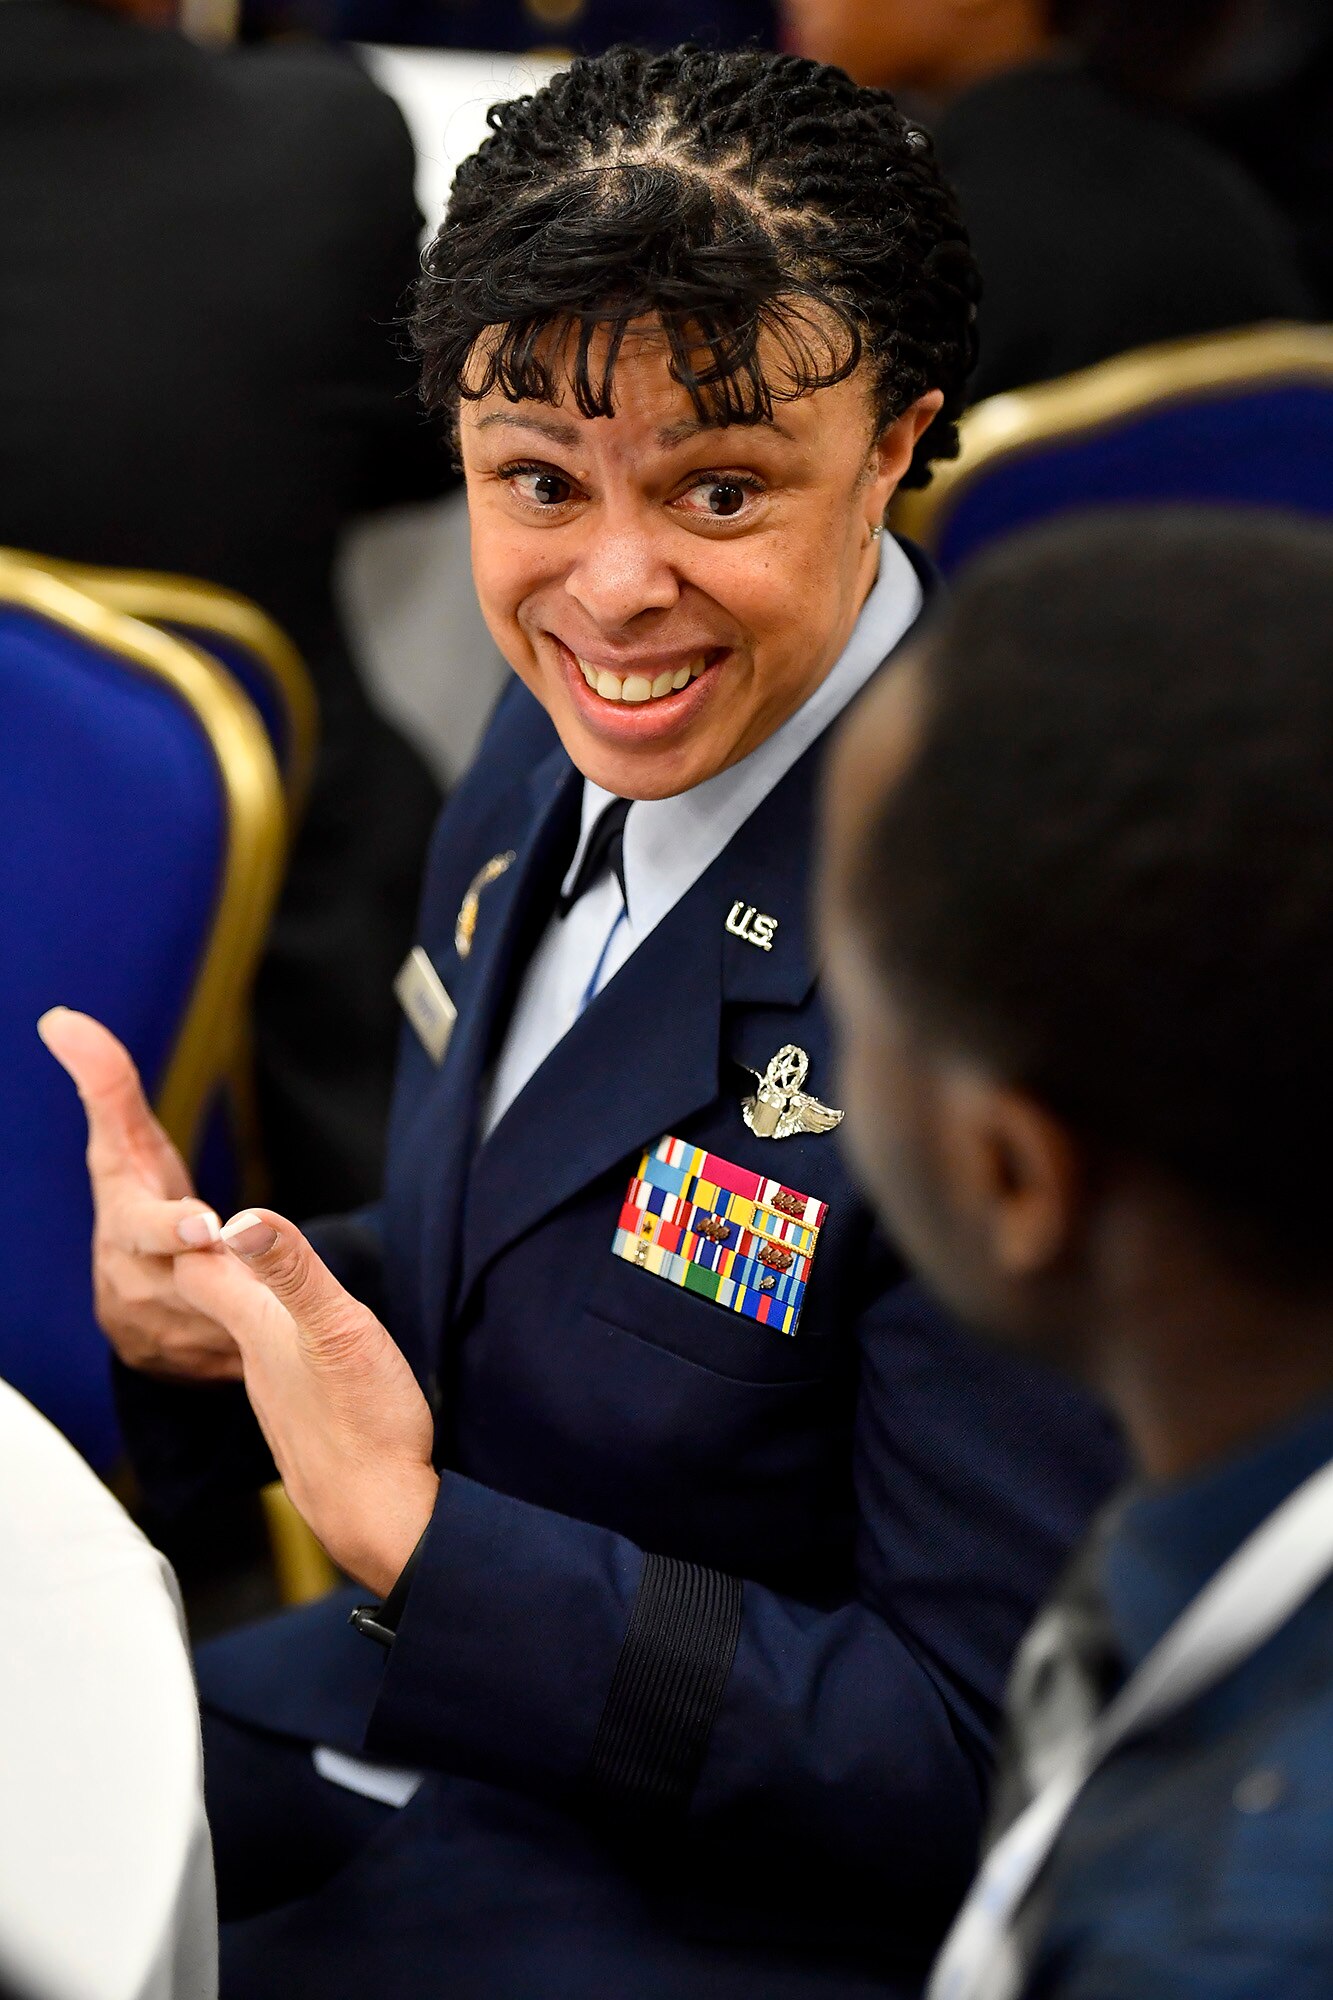 Lt. Gen. Stayce Harris, the Air Force assistant vice chief of staff, mentors high school students during the Black Engineer of the Year Awards Science, Technology, Engineering and Mathematics Conferences' Stars and Stripes ceremony Feb. 10, 2017, in Washington, D.C. (U.S. Air Force photo/Scott M. Ash)